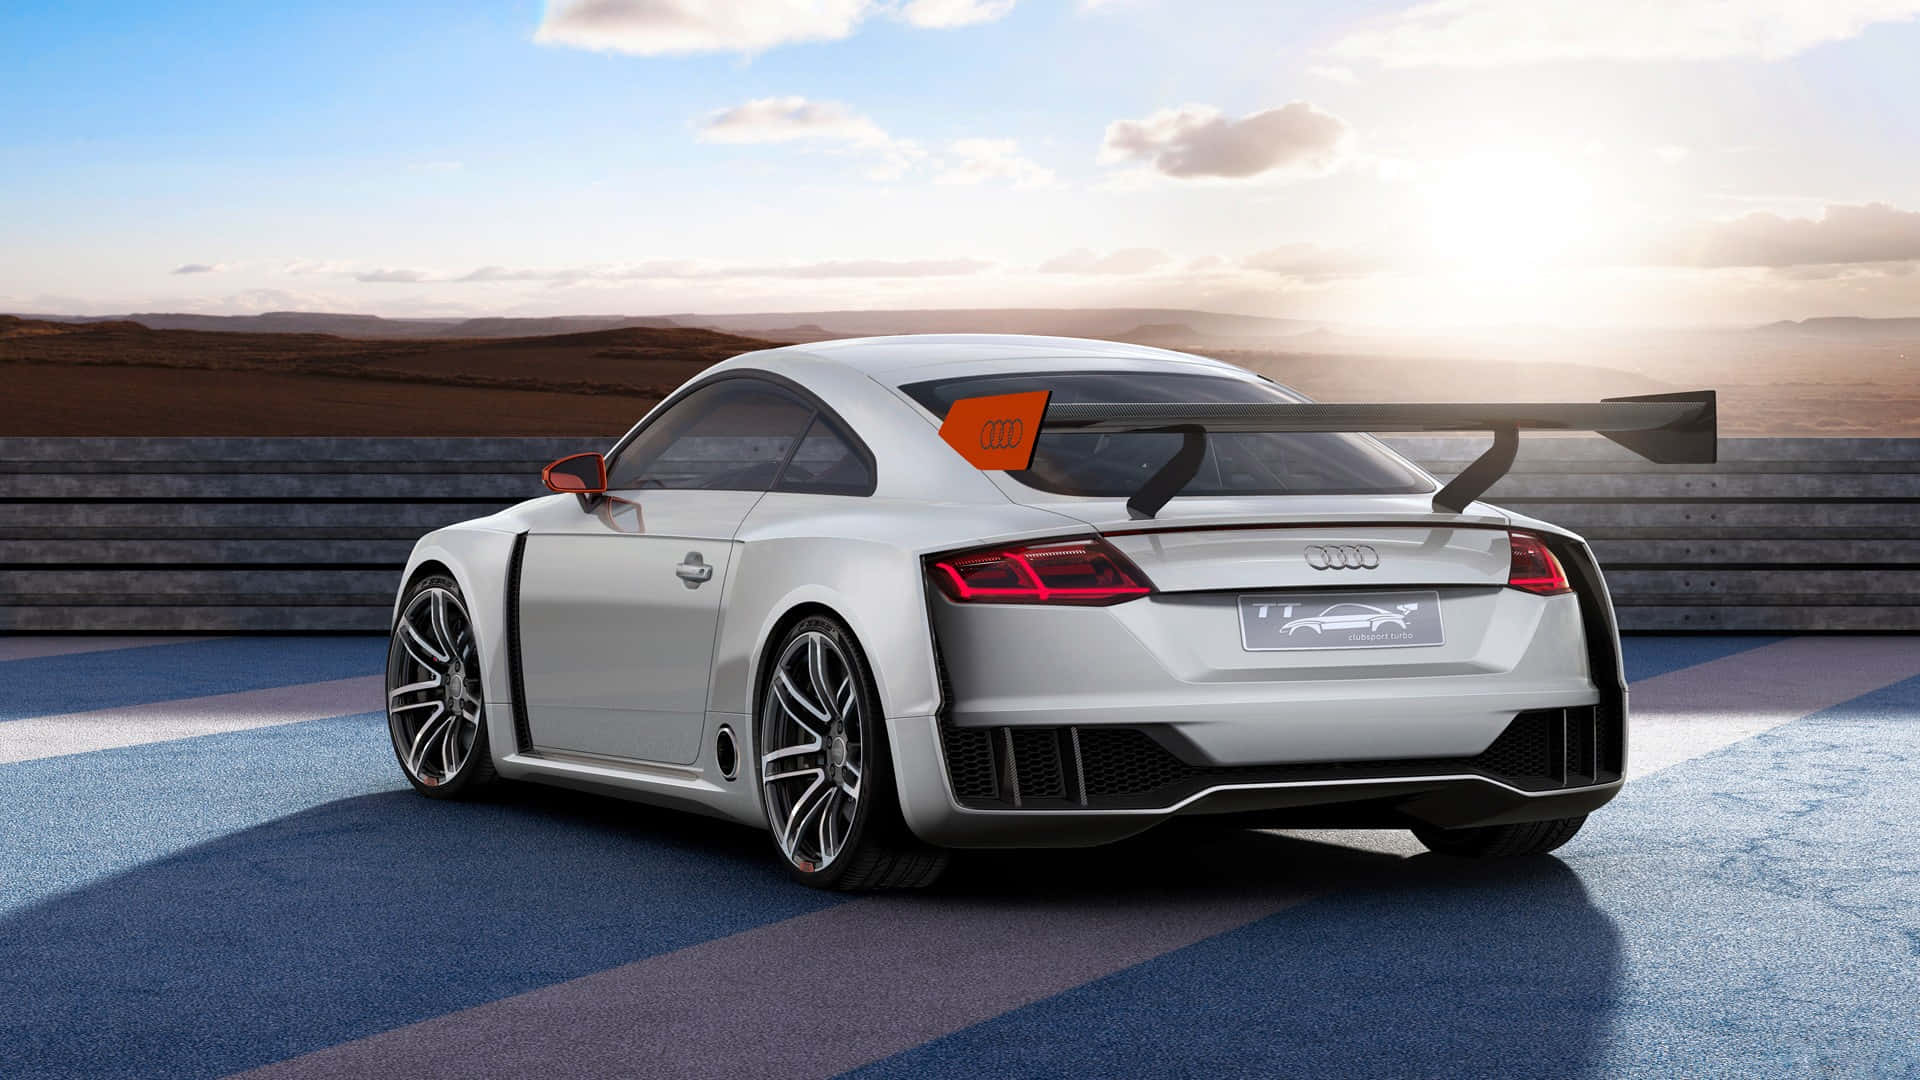 Enjoy the Innovative Features of Audi with the Latest Iphone Wallpaper